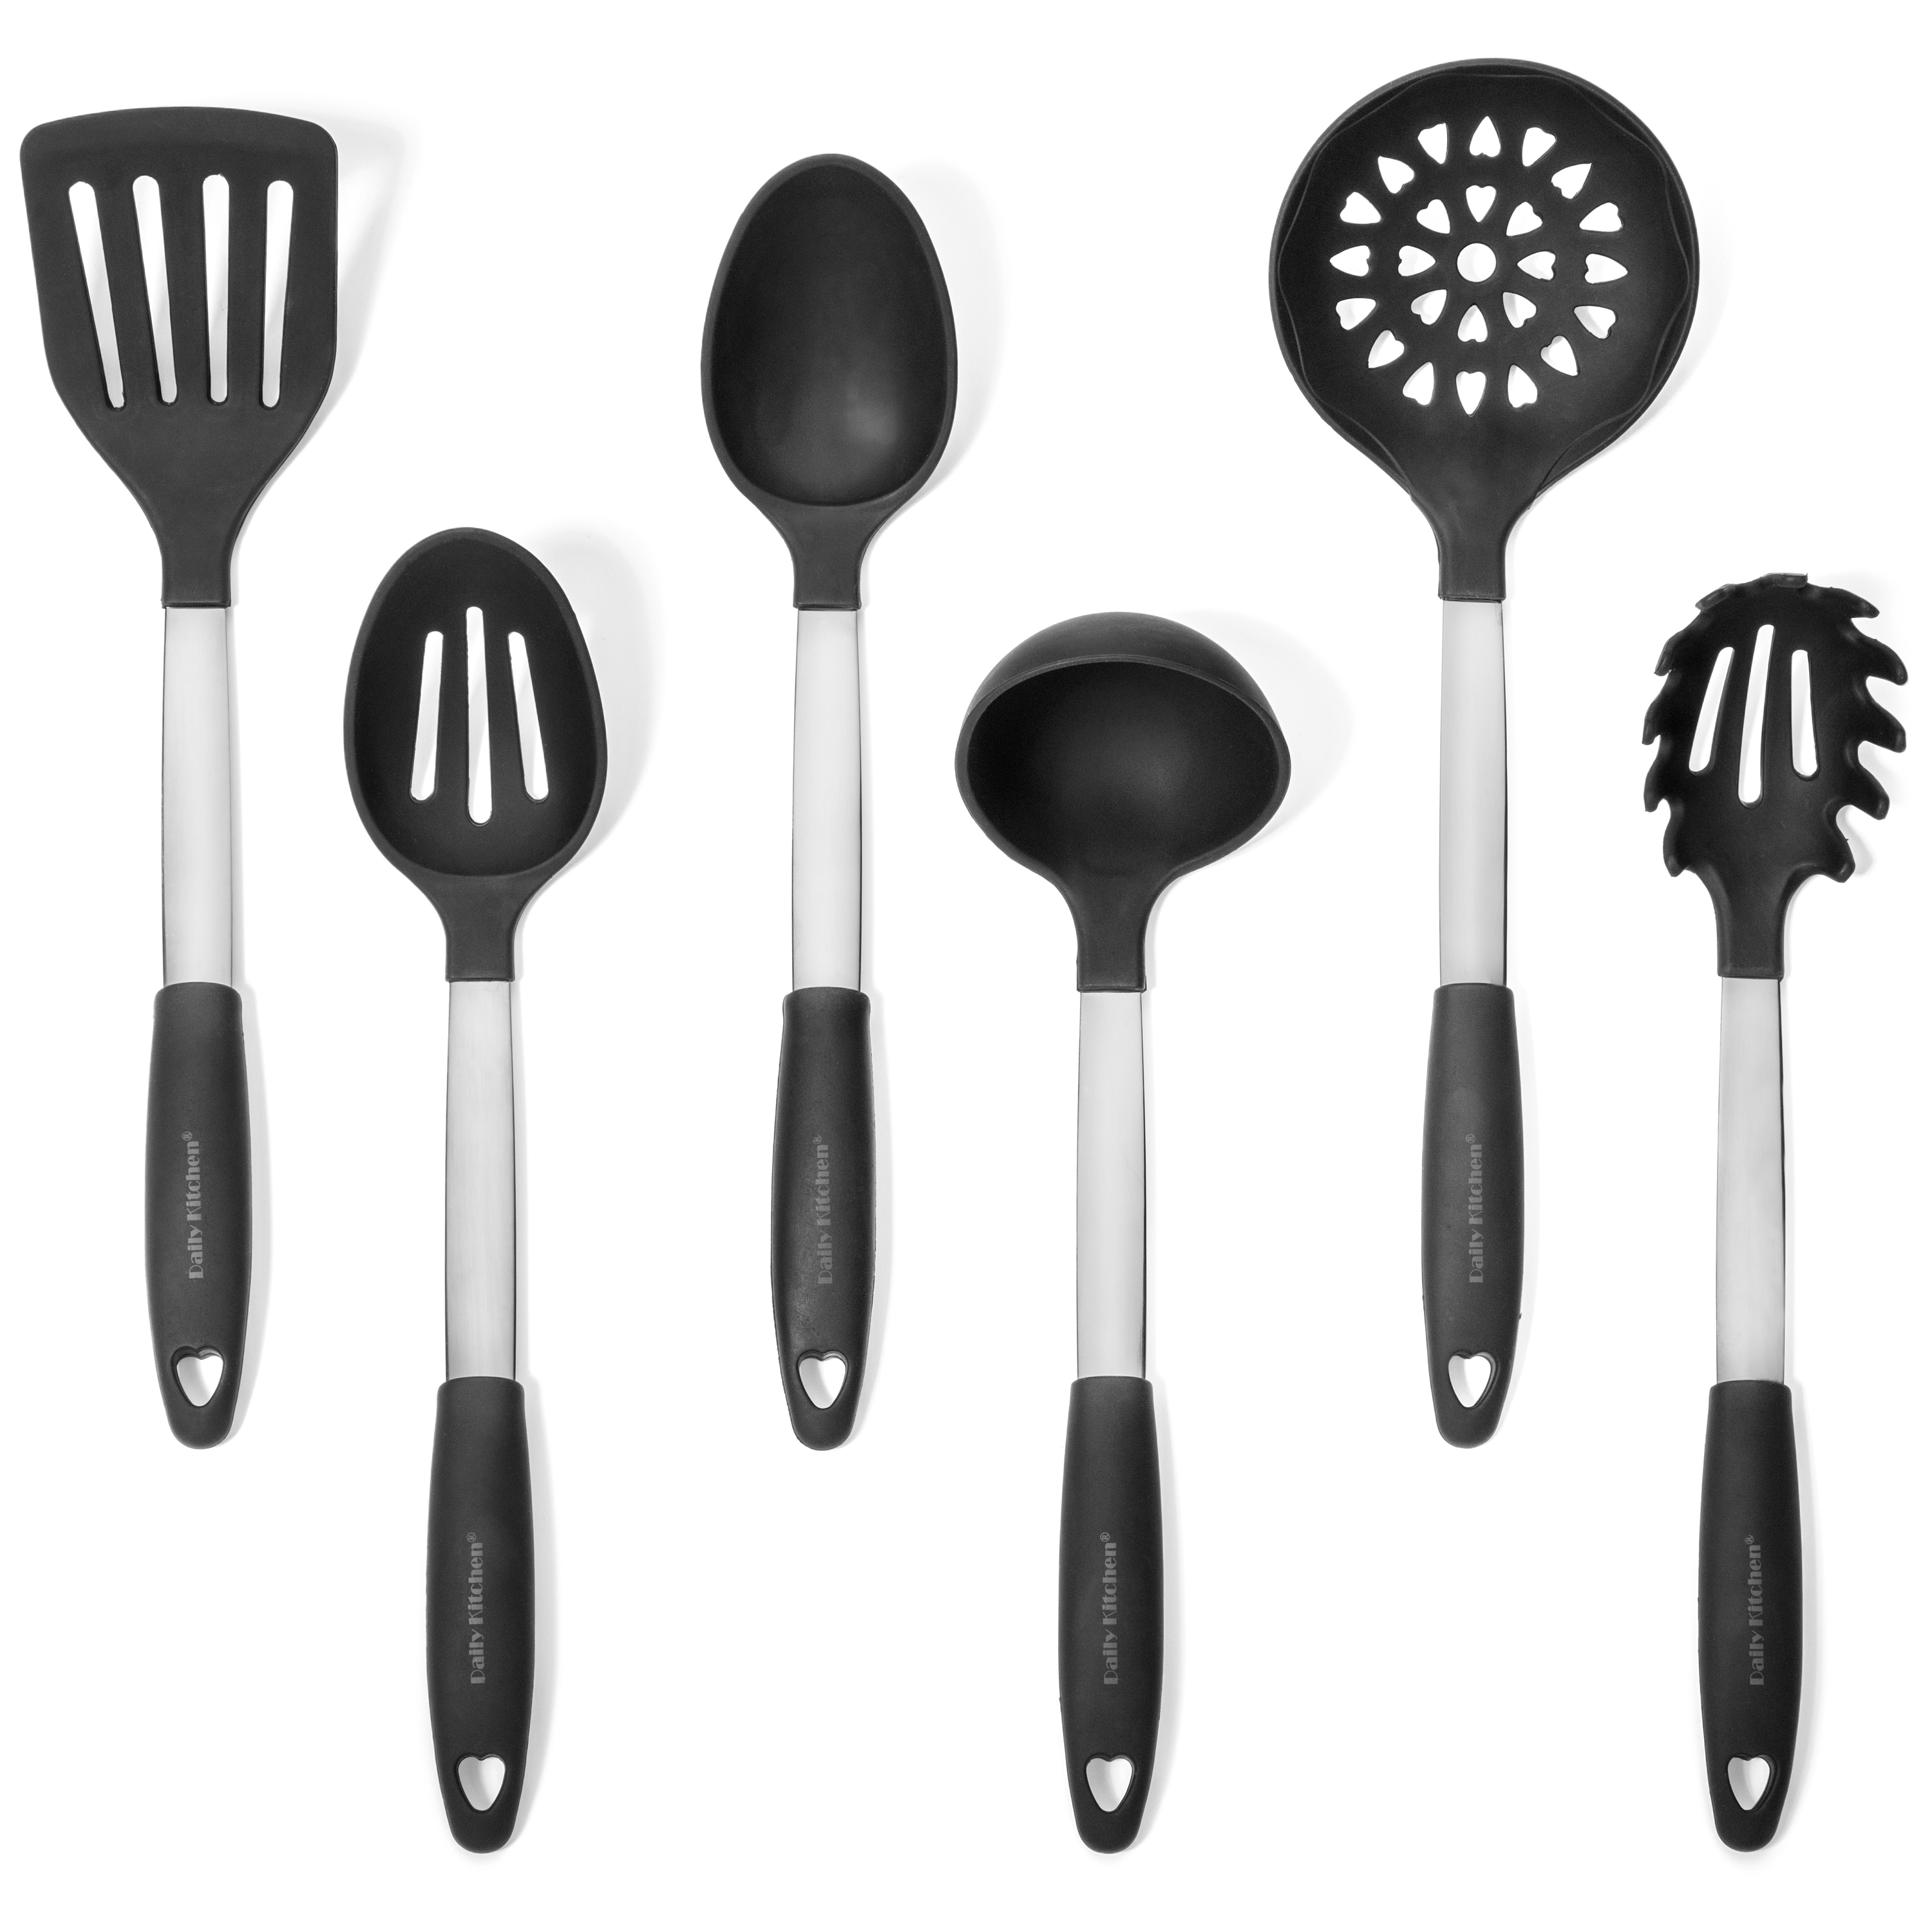 6 Piece Stainless Steel Kitchen Cooking Utensils Set Fork Ladle Slotted Spoons